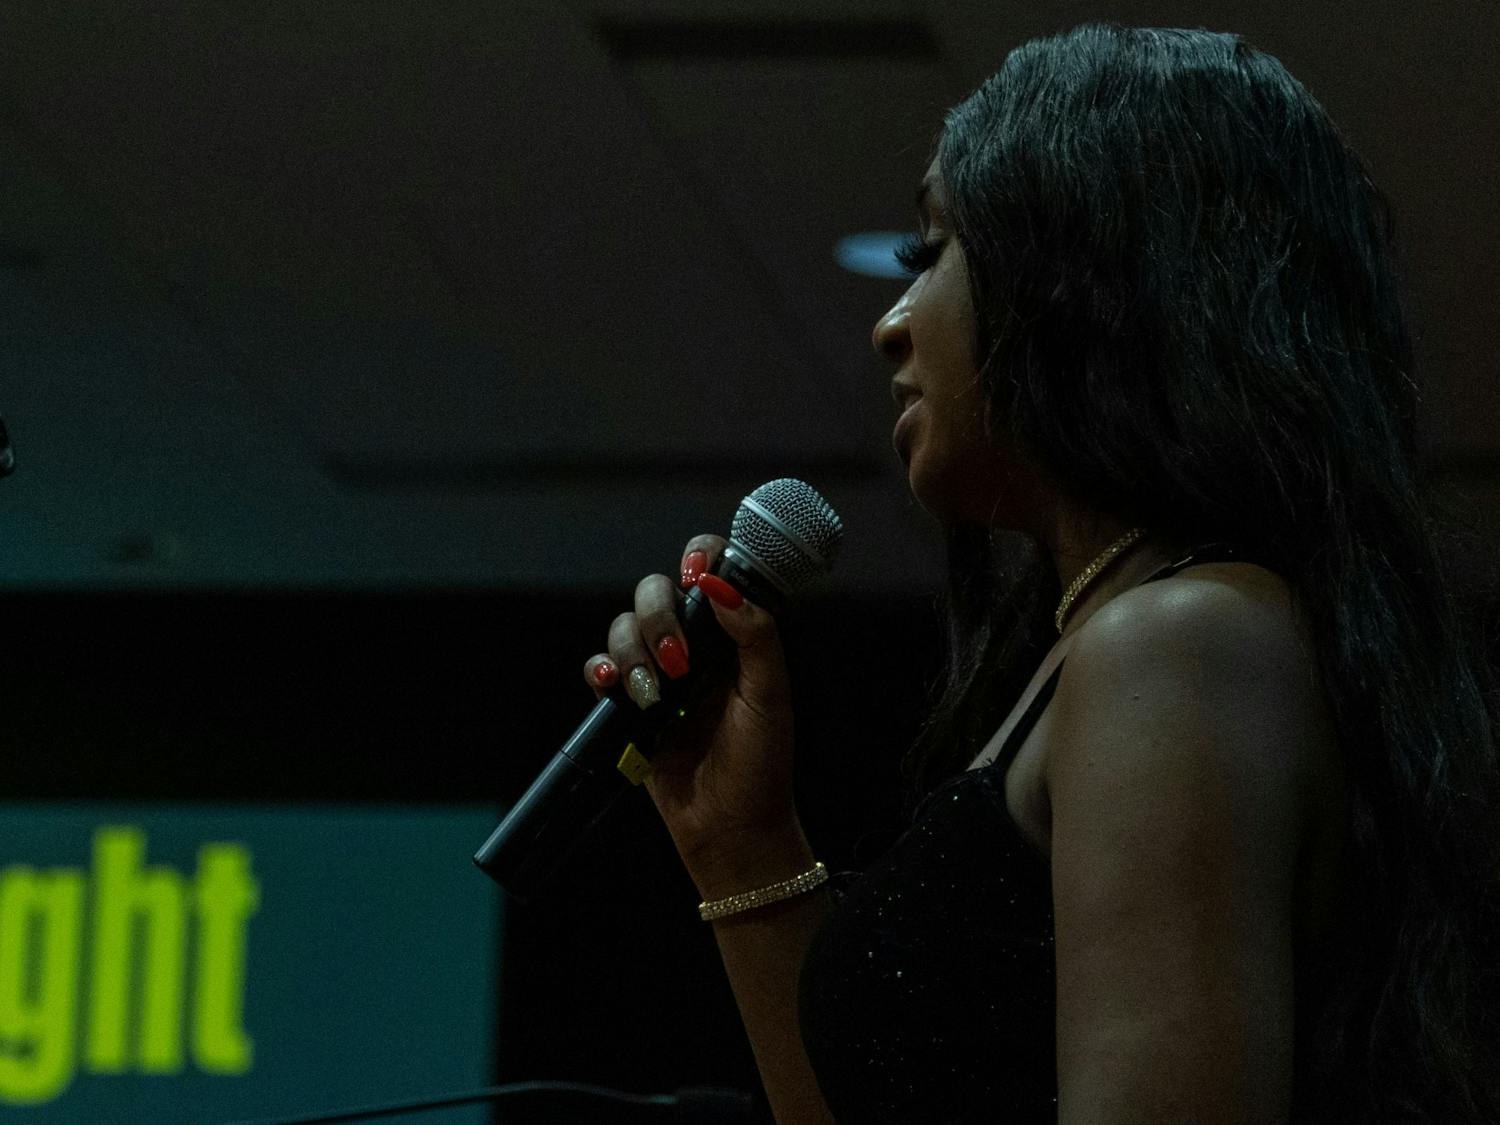 SAVVY member Aleceya Edwards delivers spoken word to gala attendees during the talent showcase on Feb. 25, 2022. Edwards performed two of her own poems following years of working backstage at the gala.